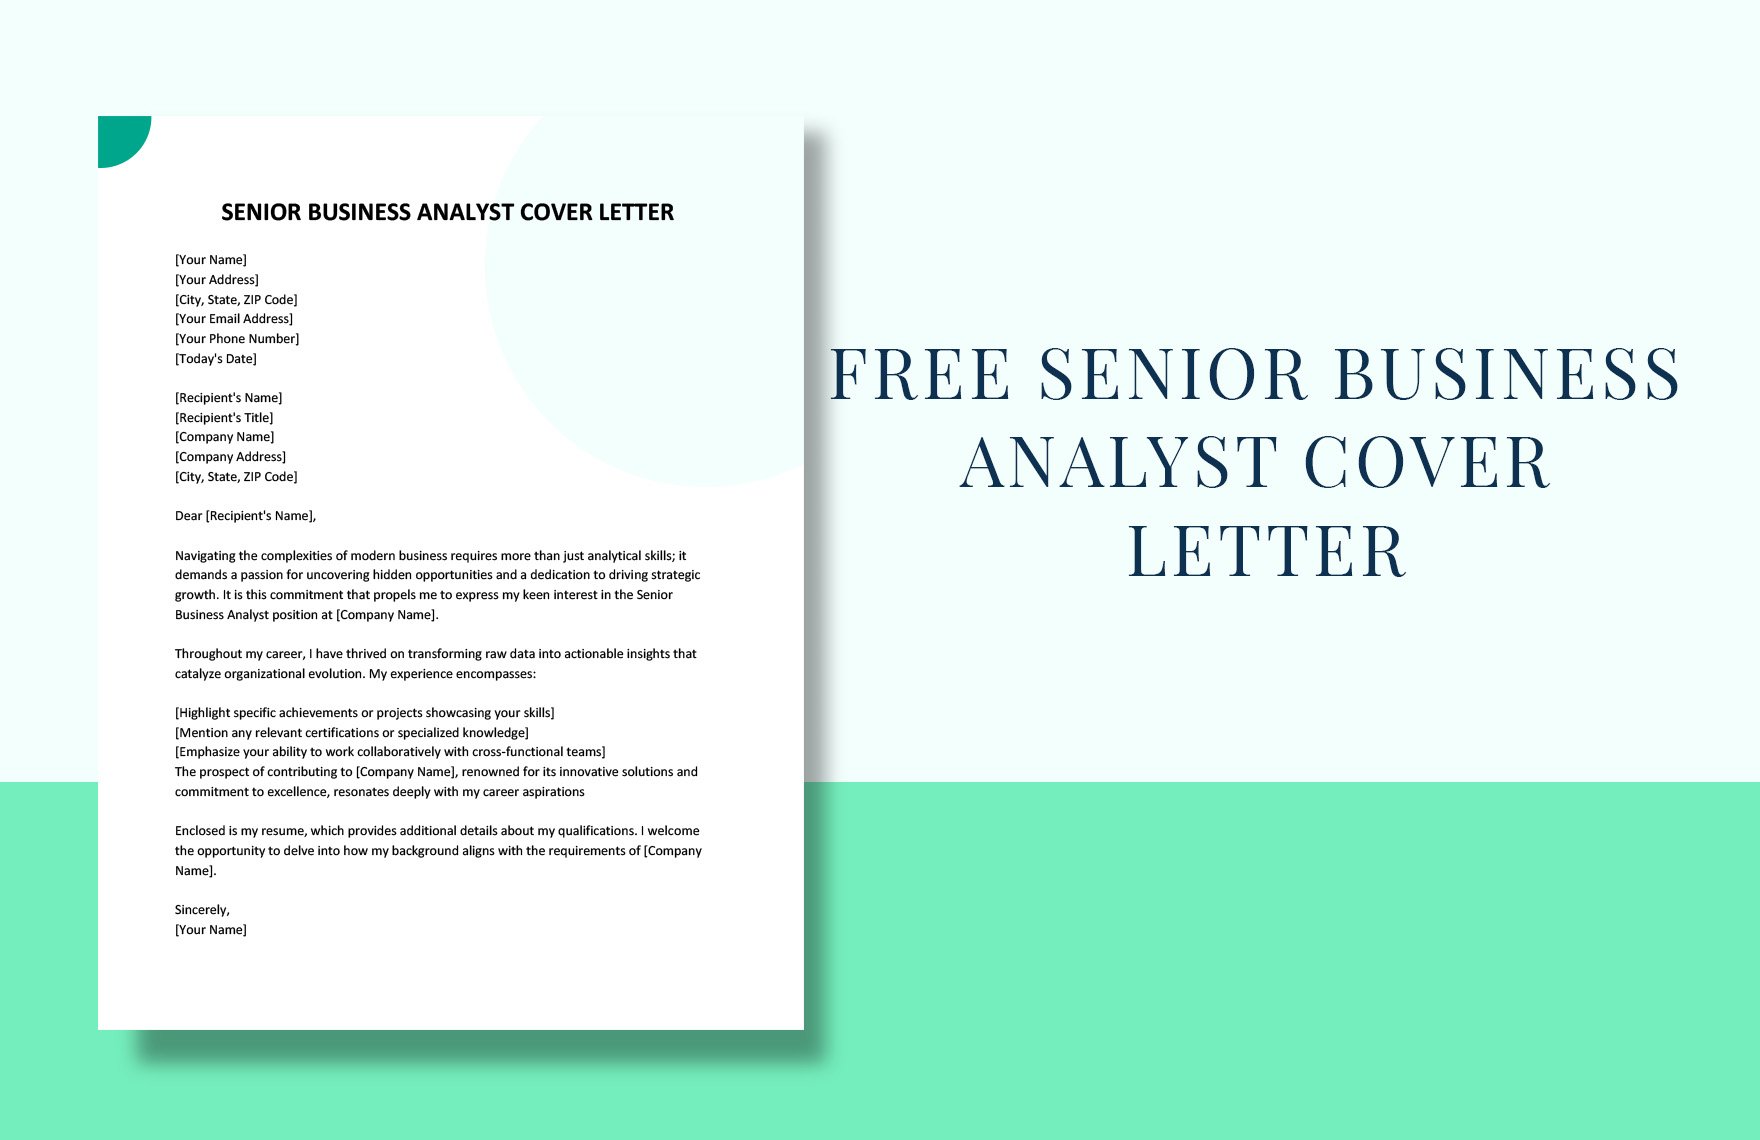 Senior Business Analyst Cover Letter in Word, Google Docs